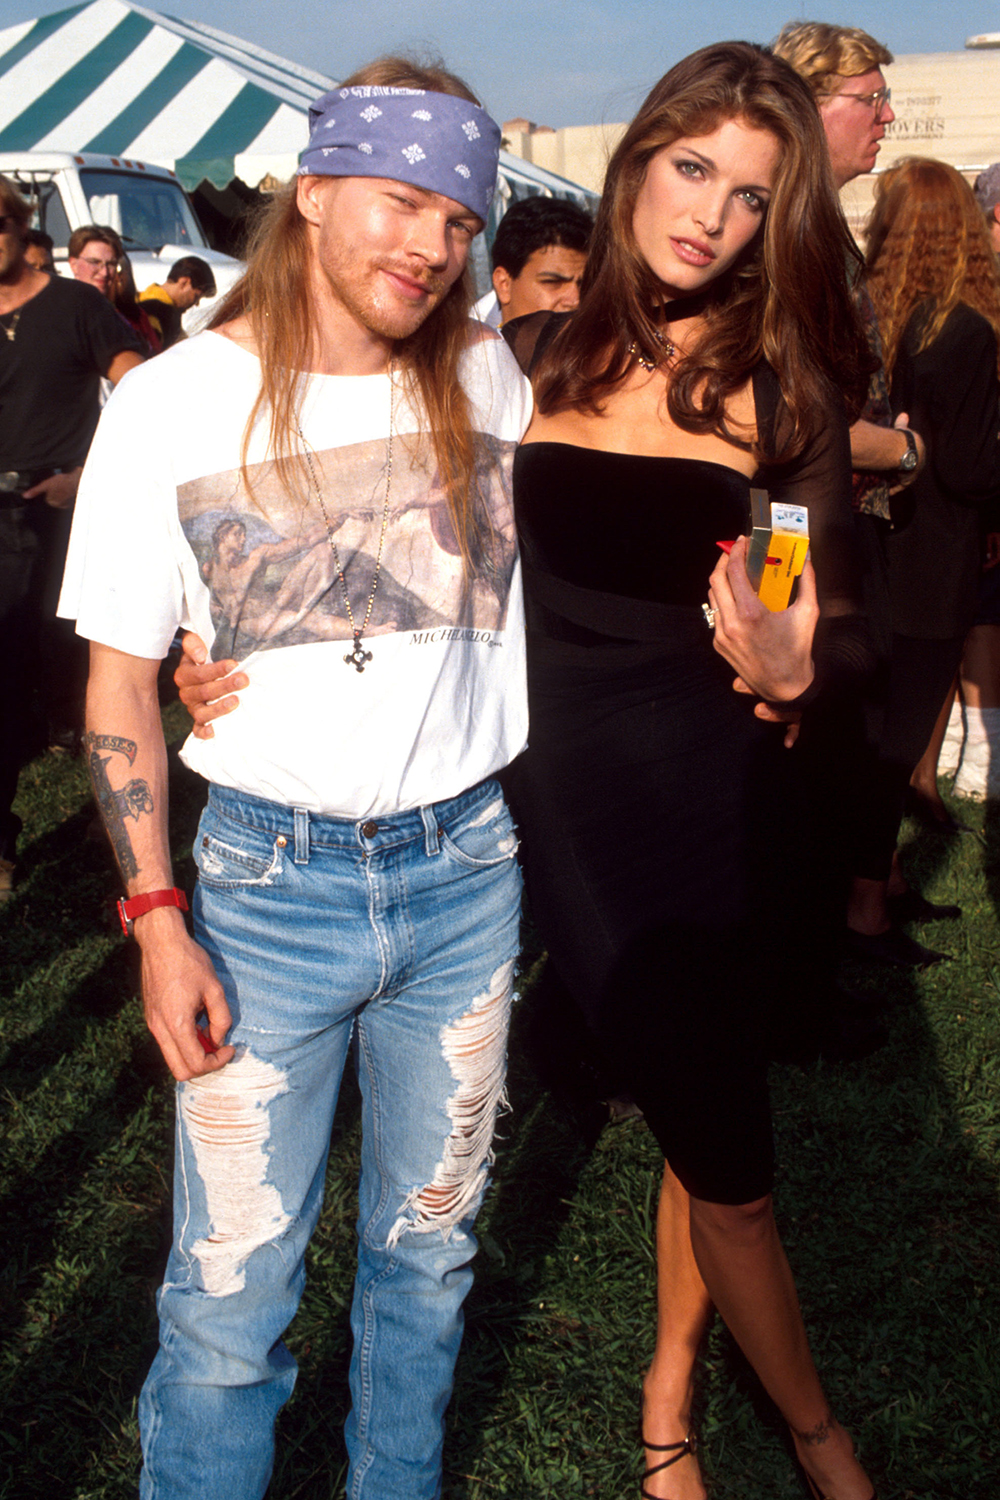 Stephanie Seymour dated Guns N' Roses lead vocalist Axl Rose for two years in the 90s.